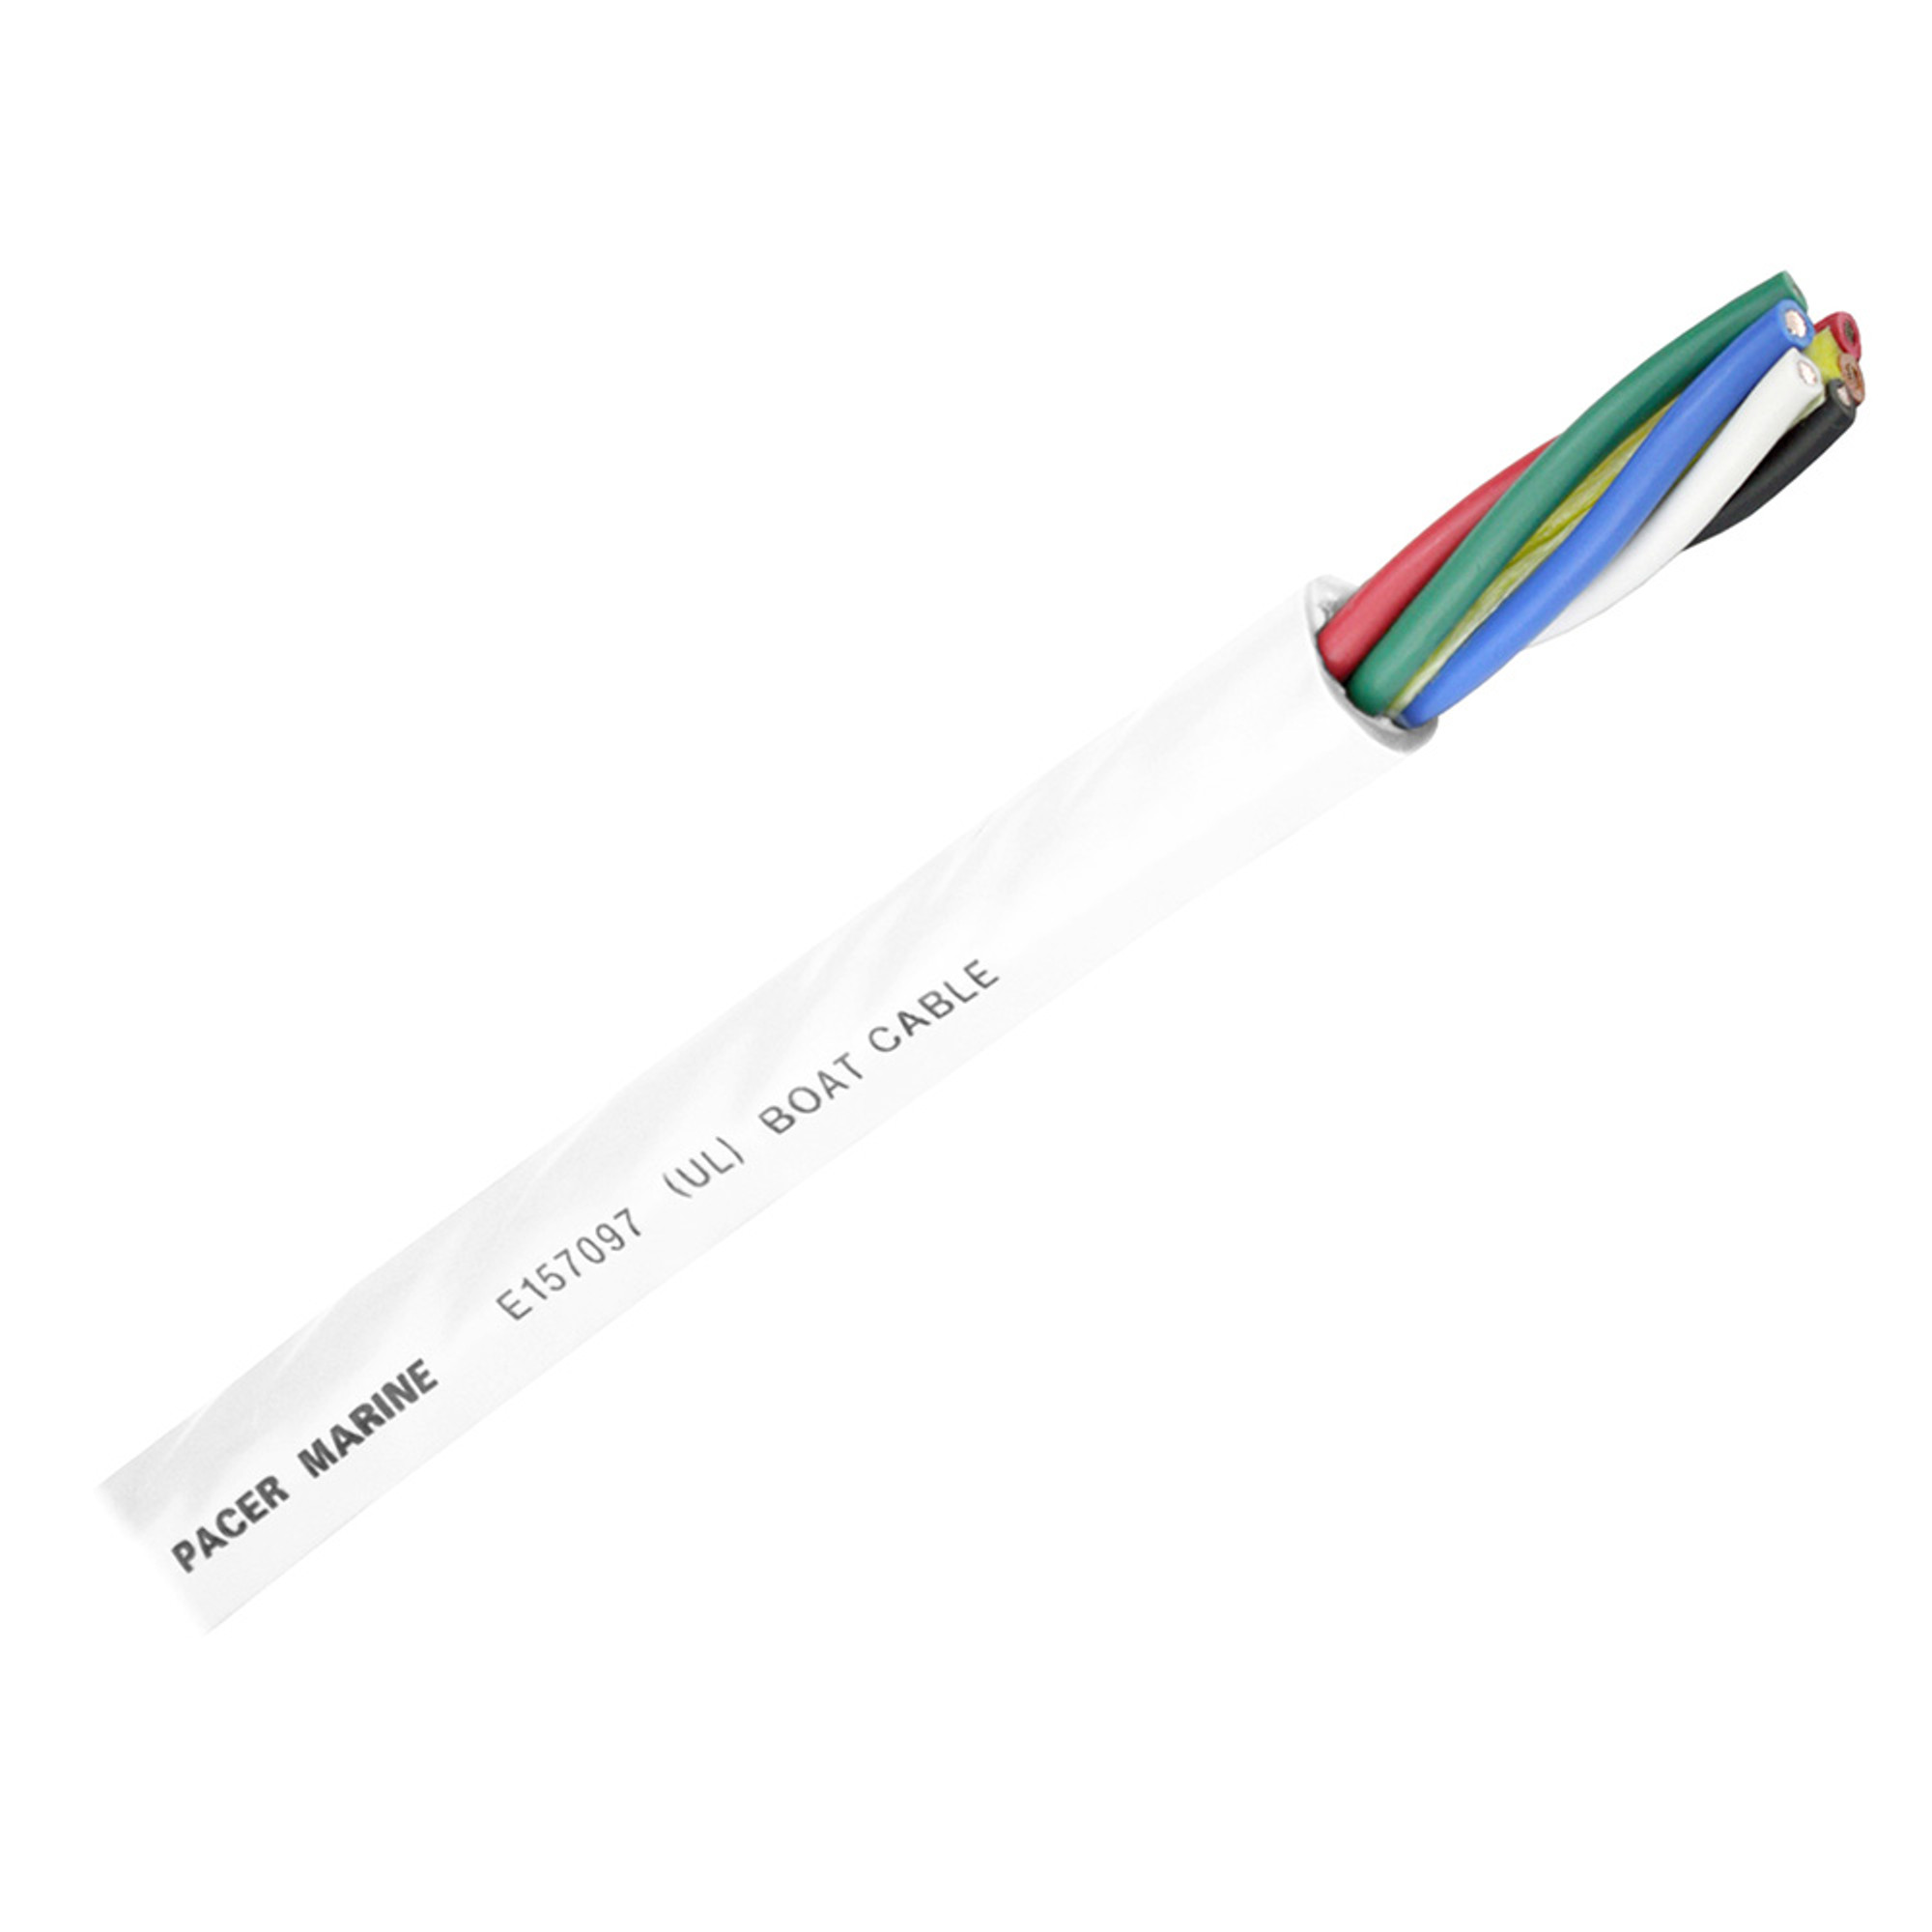 Pacer Round 6 Conductor Cable - 100' - 14/6 AWG - Black, Brown, Red, Green, Blue & White